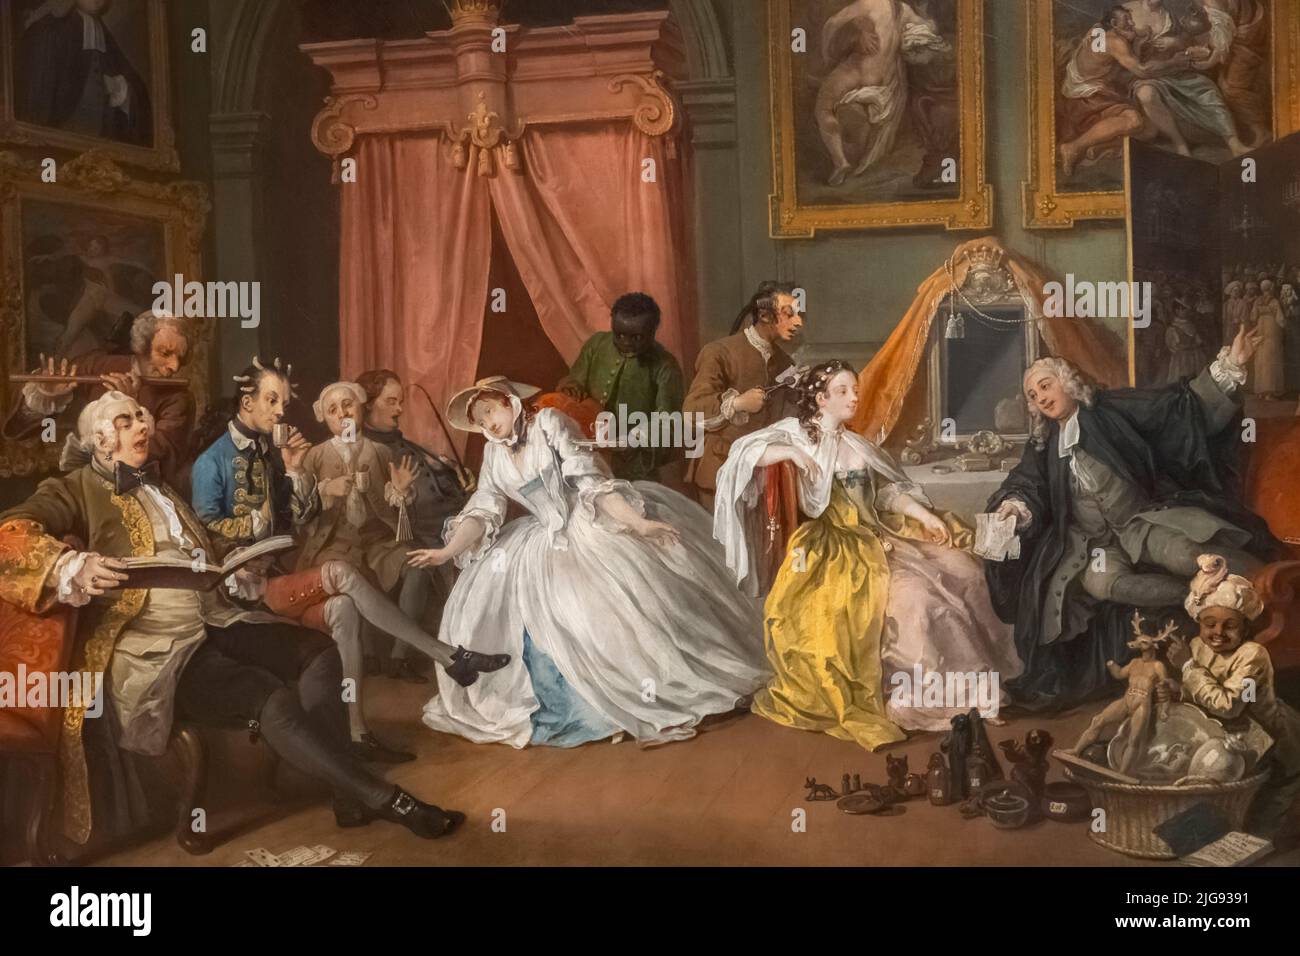 Painting from the series Marriage A-la-Mode titled "The Toilette" by William Hogarth dated 1743 Stock Photo